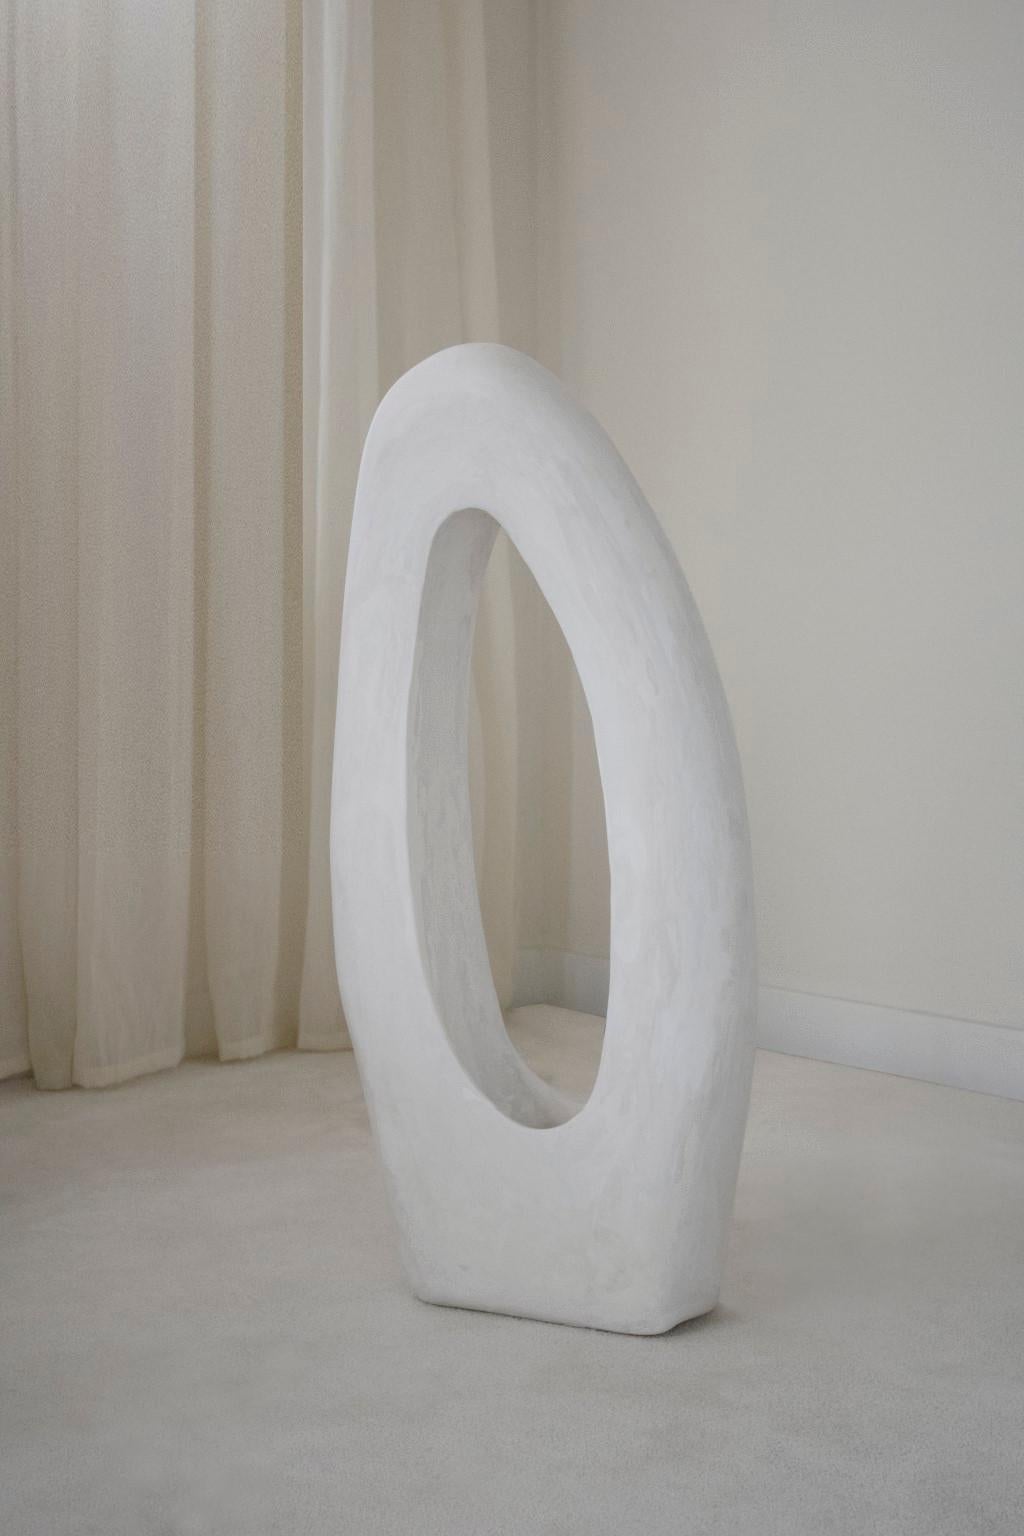 Lacuna lamp by AOAO
Dimensions: W 37 x D 12 x H 85 cm
Materials: White Plaster
Color options available upon request. 

The idea was born after deciding to reconnect with my family and my grandfather – a sculptor artist. Learning to sculpt and